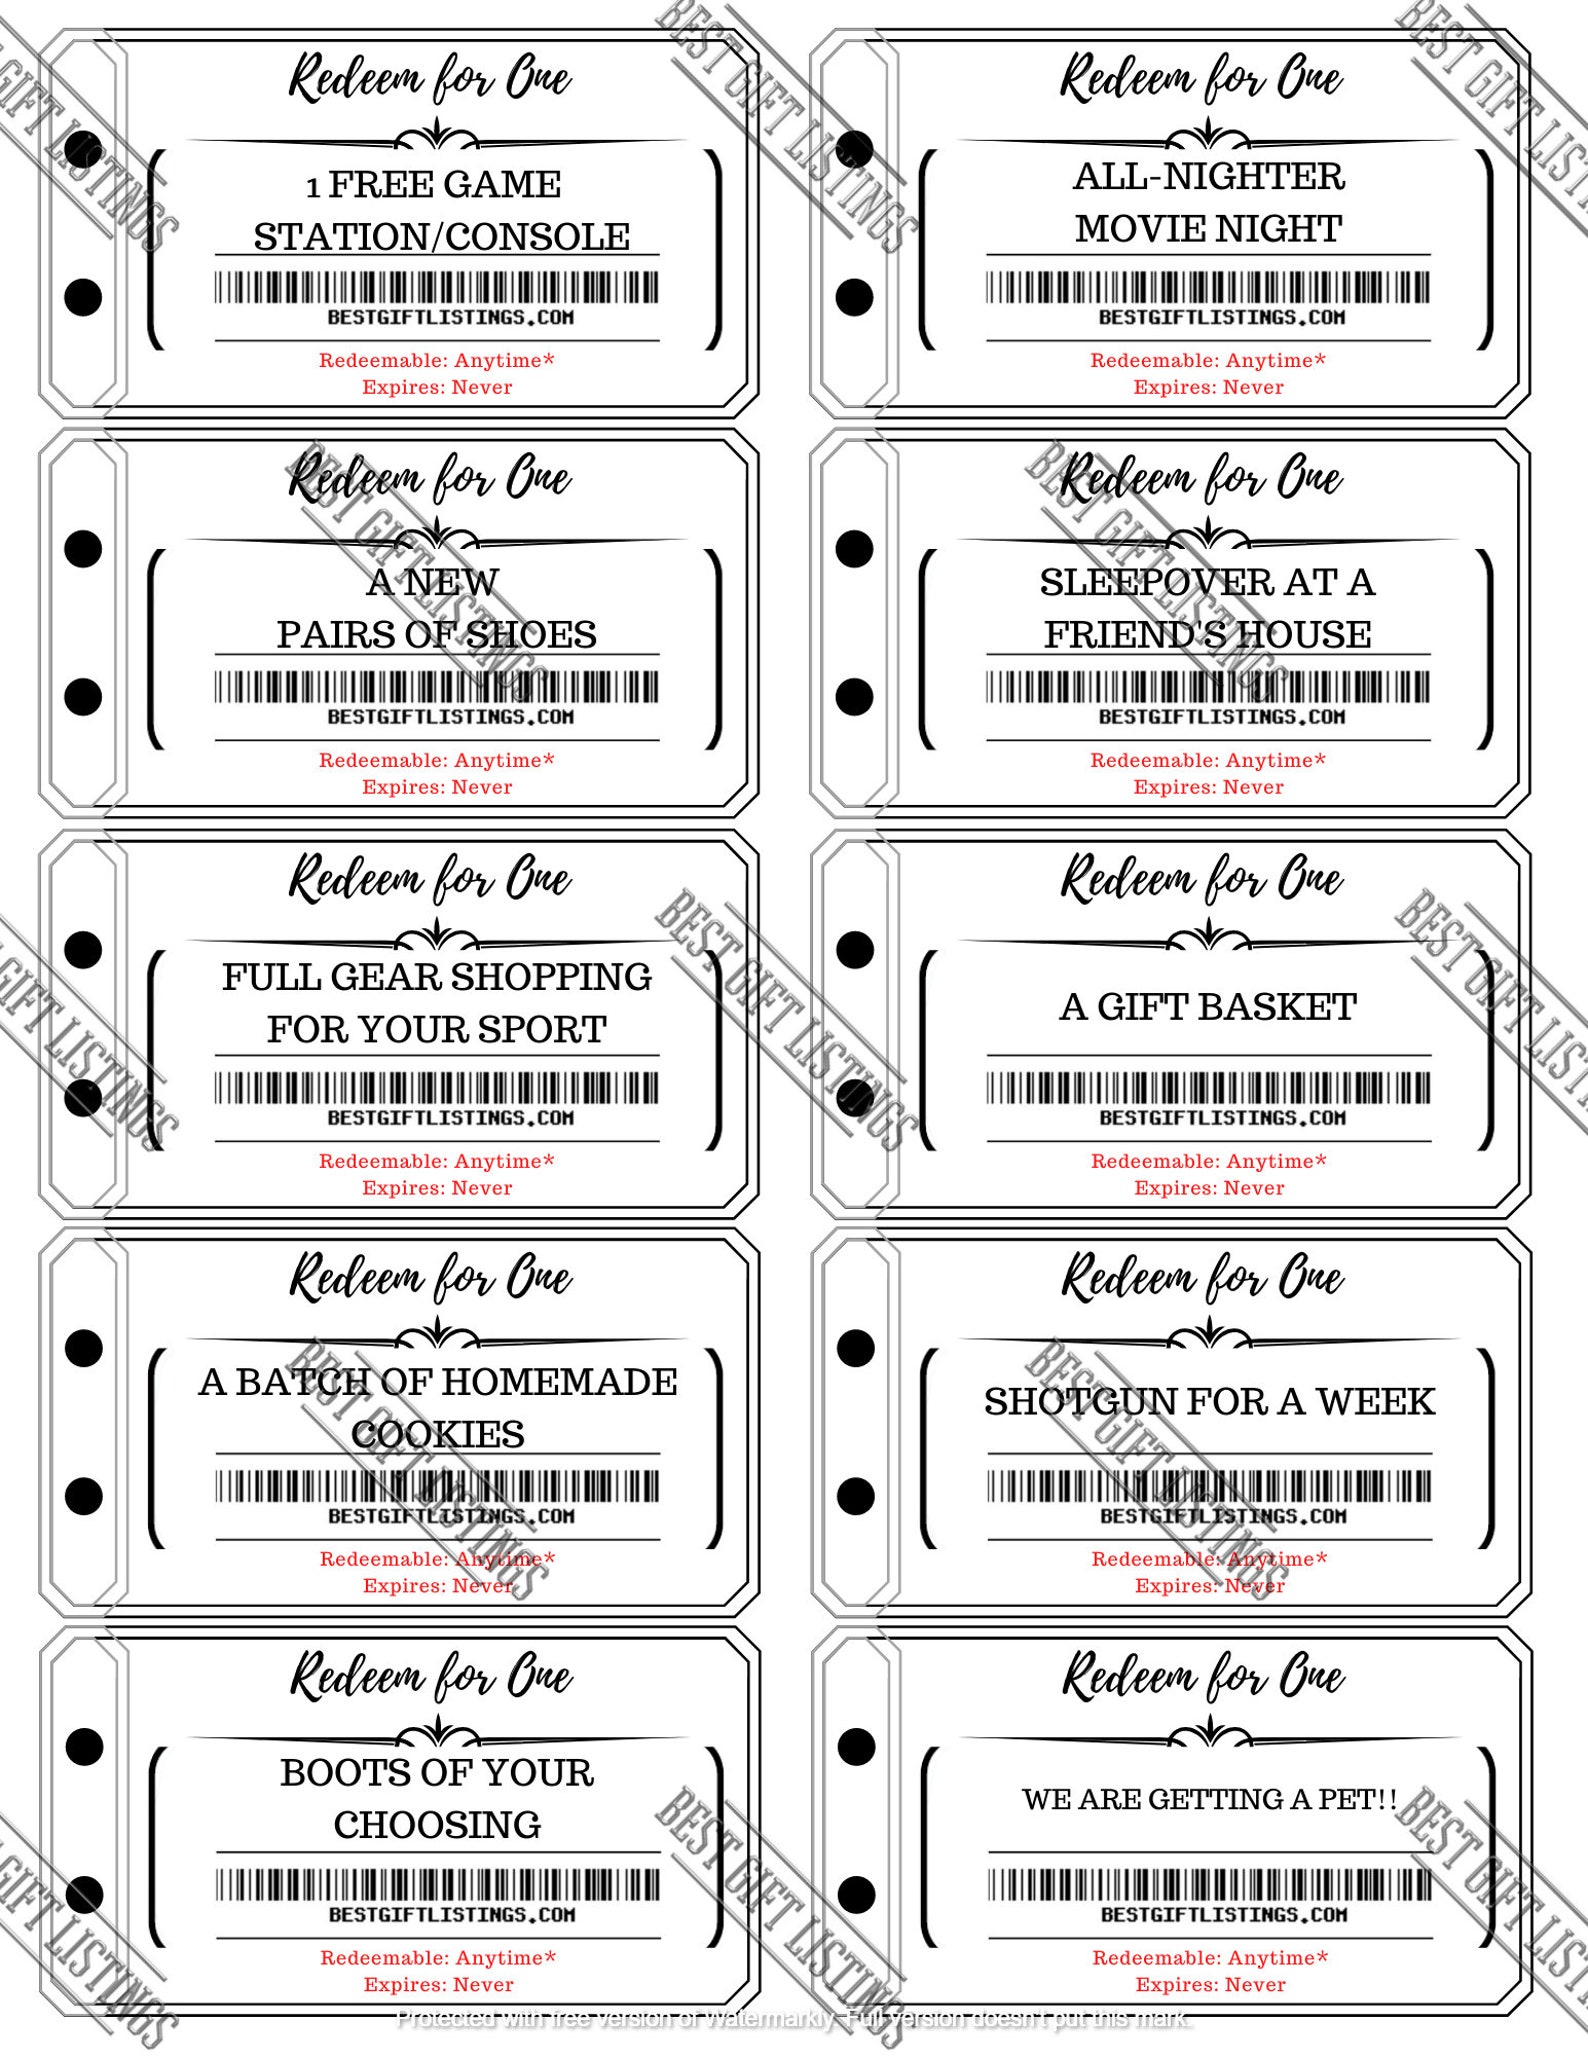 grocery-coupons-printable-free-no-registration-free-printable-templates